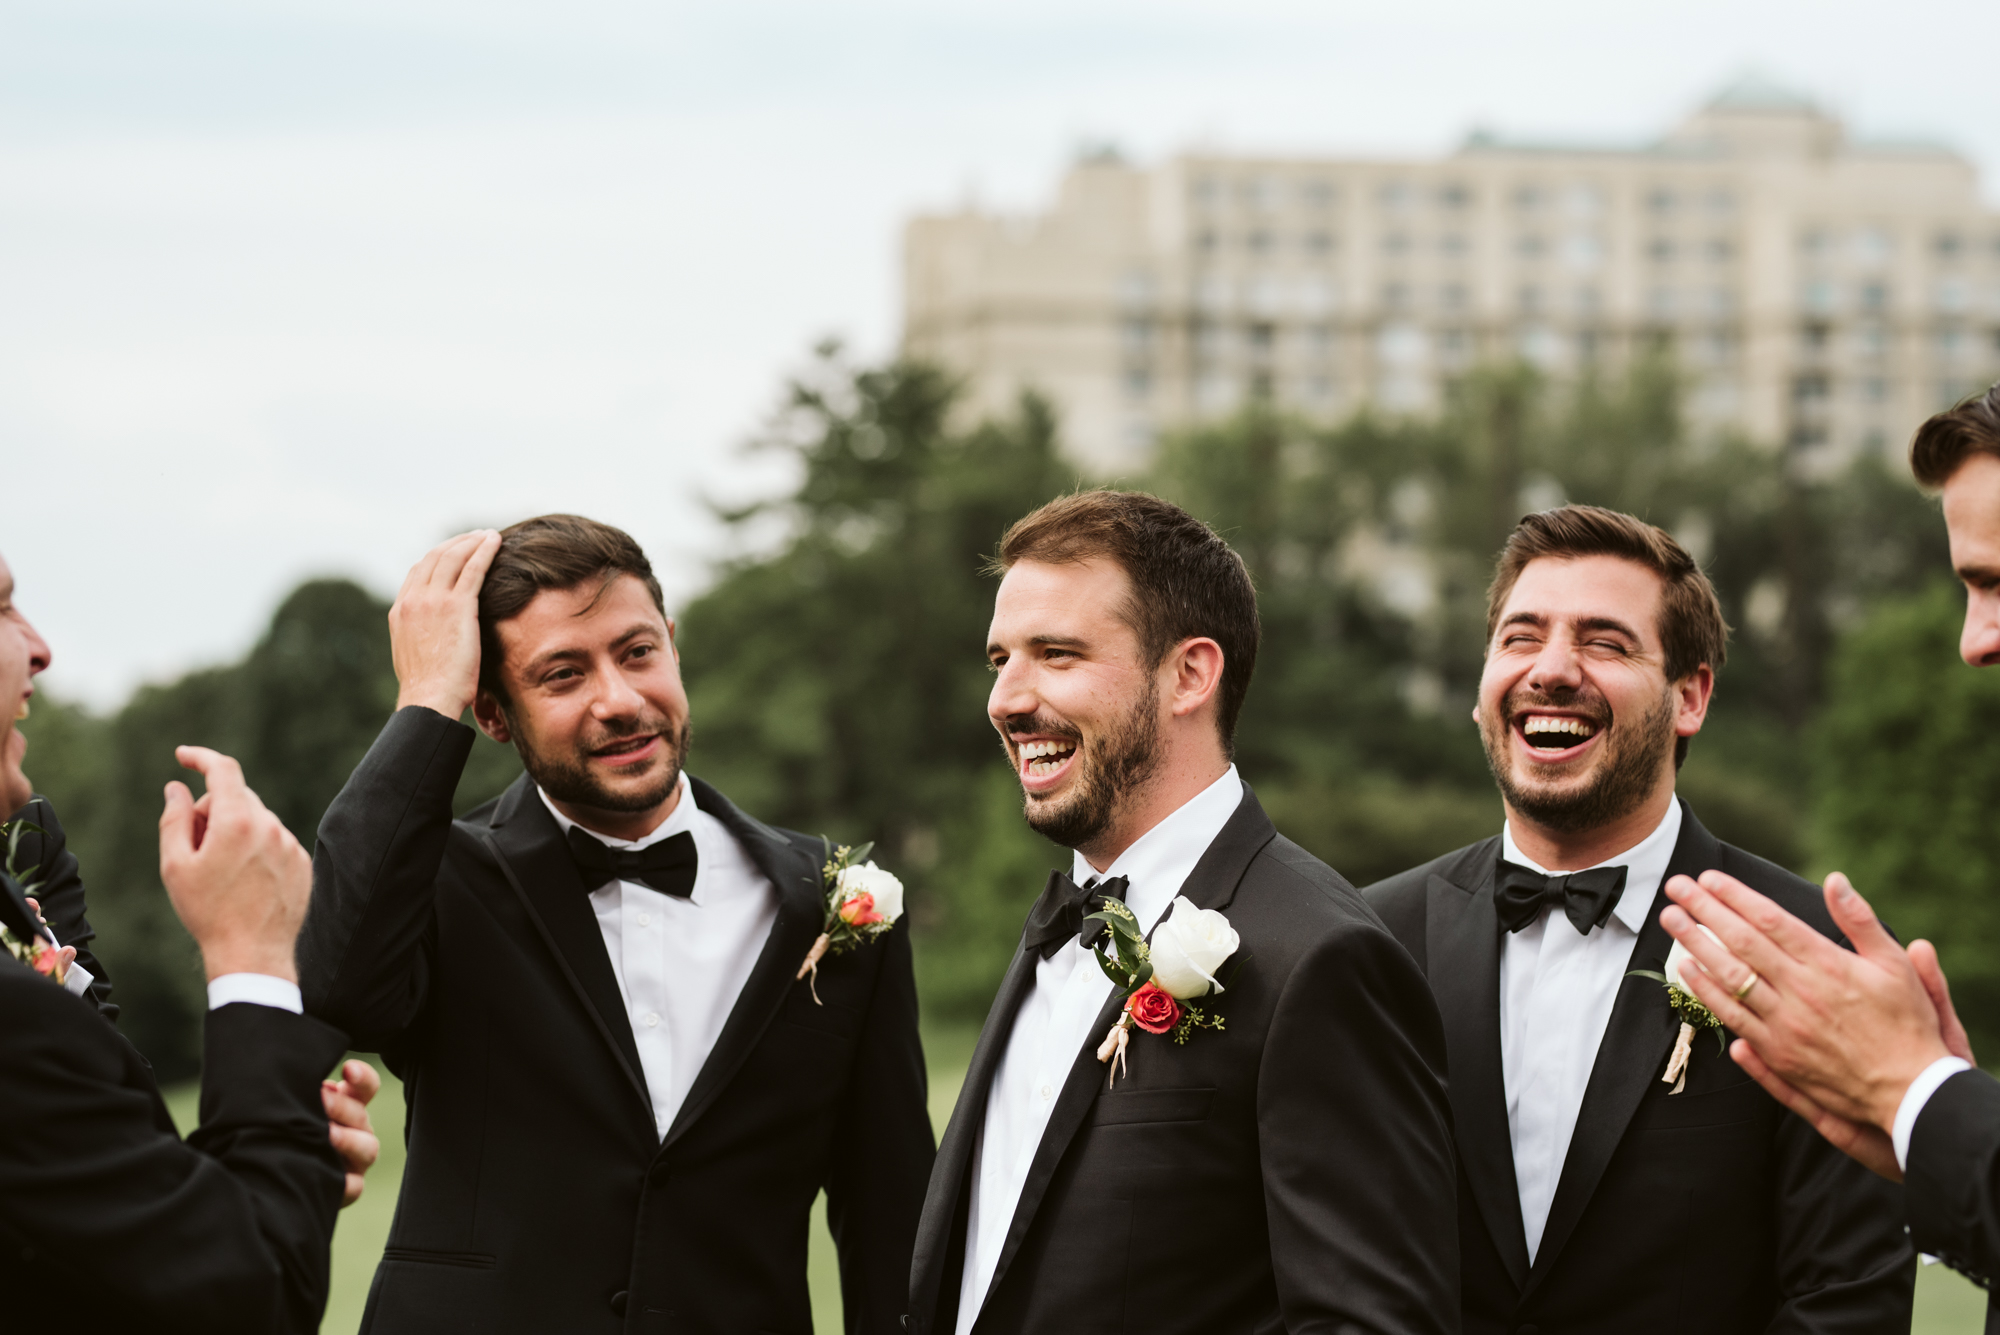 Elegant, Columbia Country Club, Chevy Chase Maryland, Baltimore Wedding Photographer, Classic, Traditional, Jewish Wedding, Groomsmen Laughing Before Ceremony, Candid Photo, Meg Owen Floral Designs